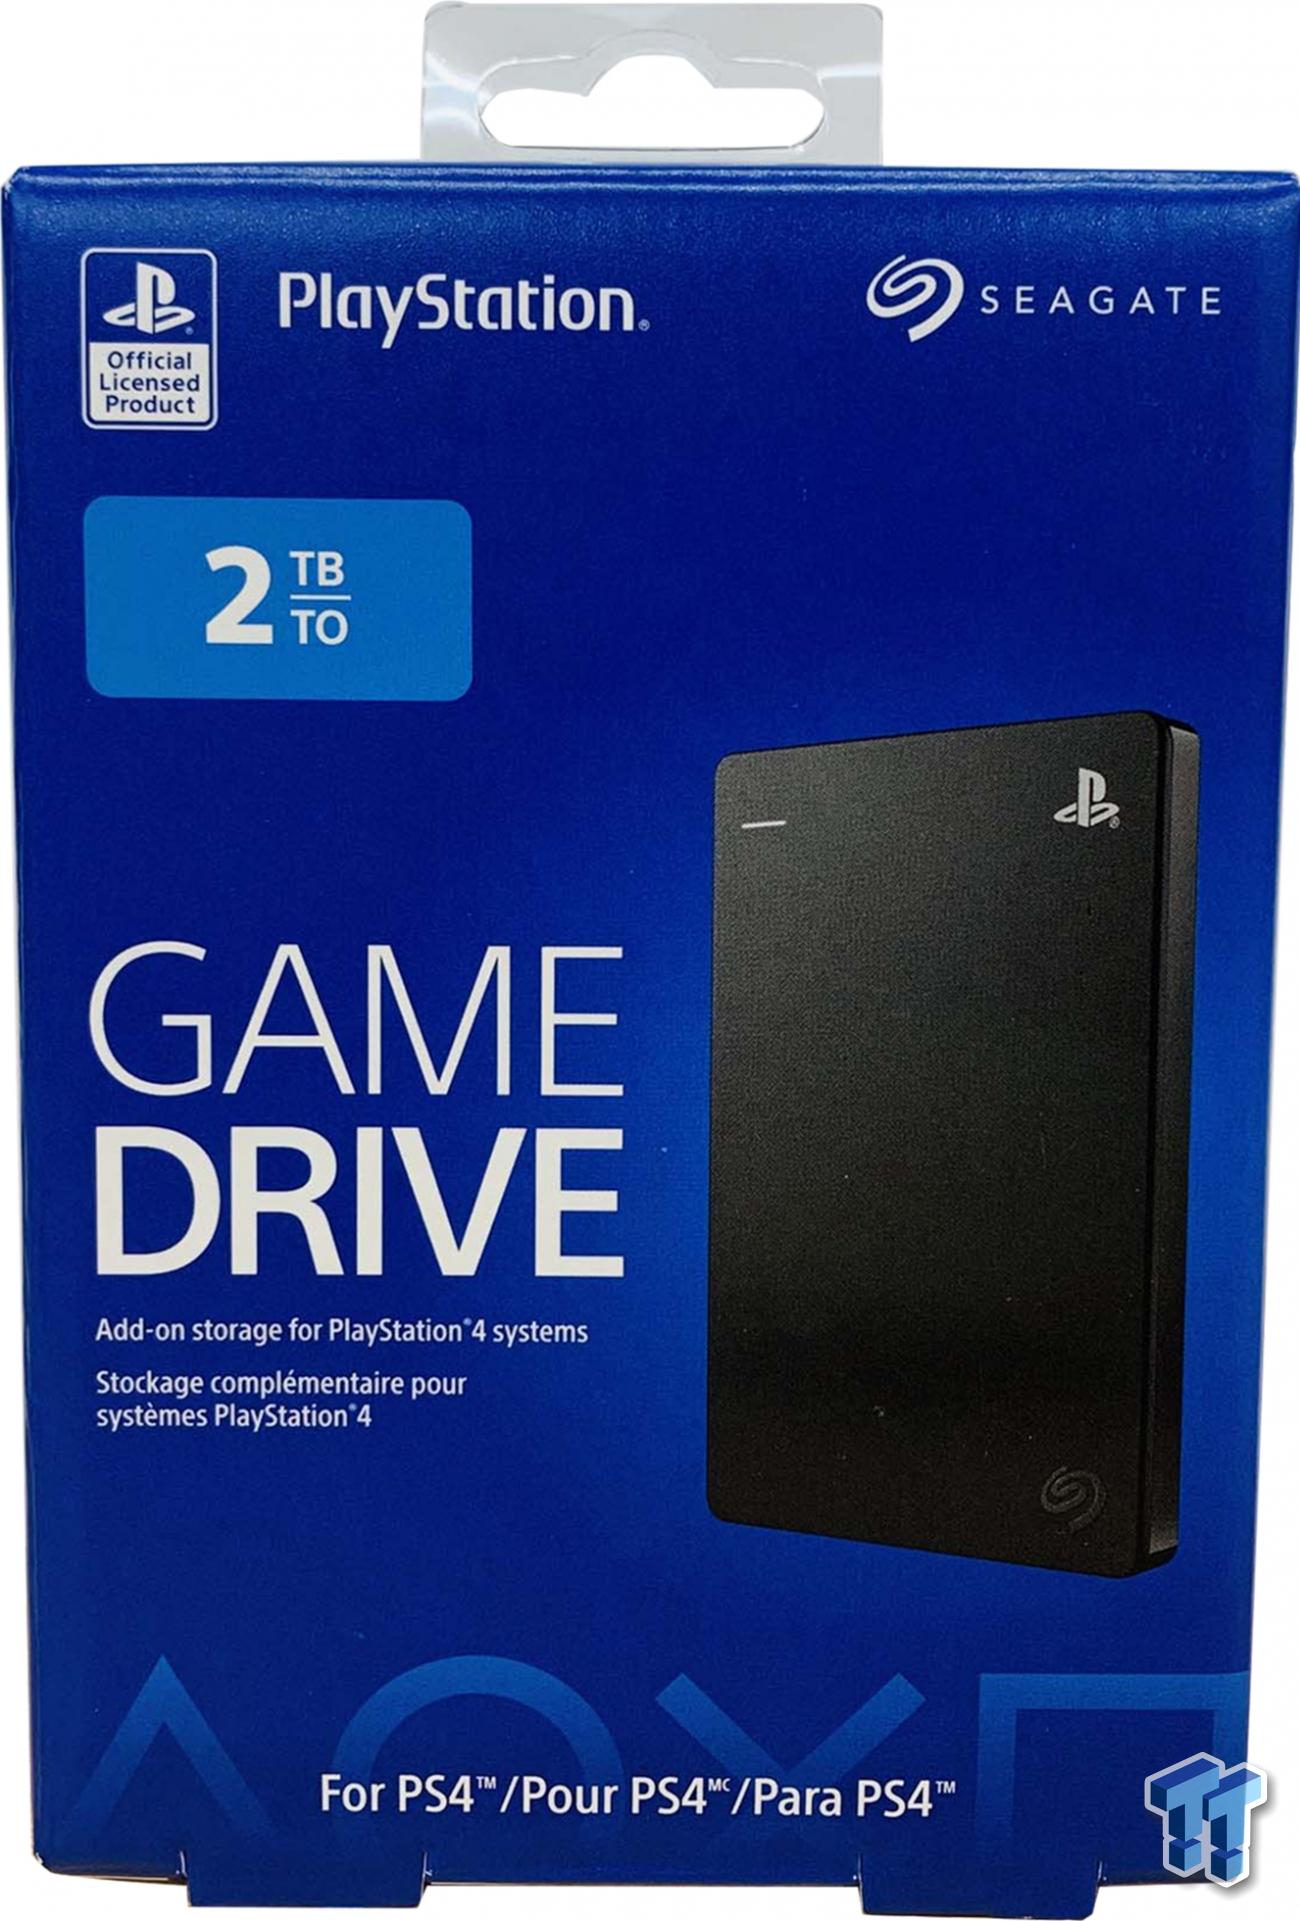 PS4 Pro Storage Upgrade Hard Drive Expansion 2TB Portable USB 3.0 Games PS4 